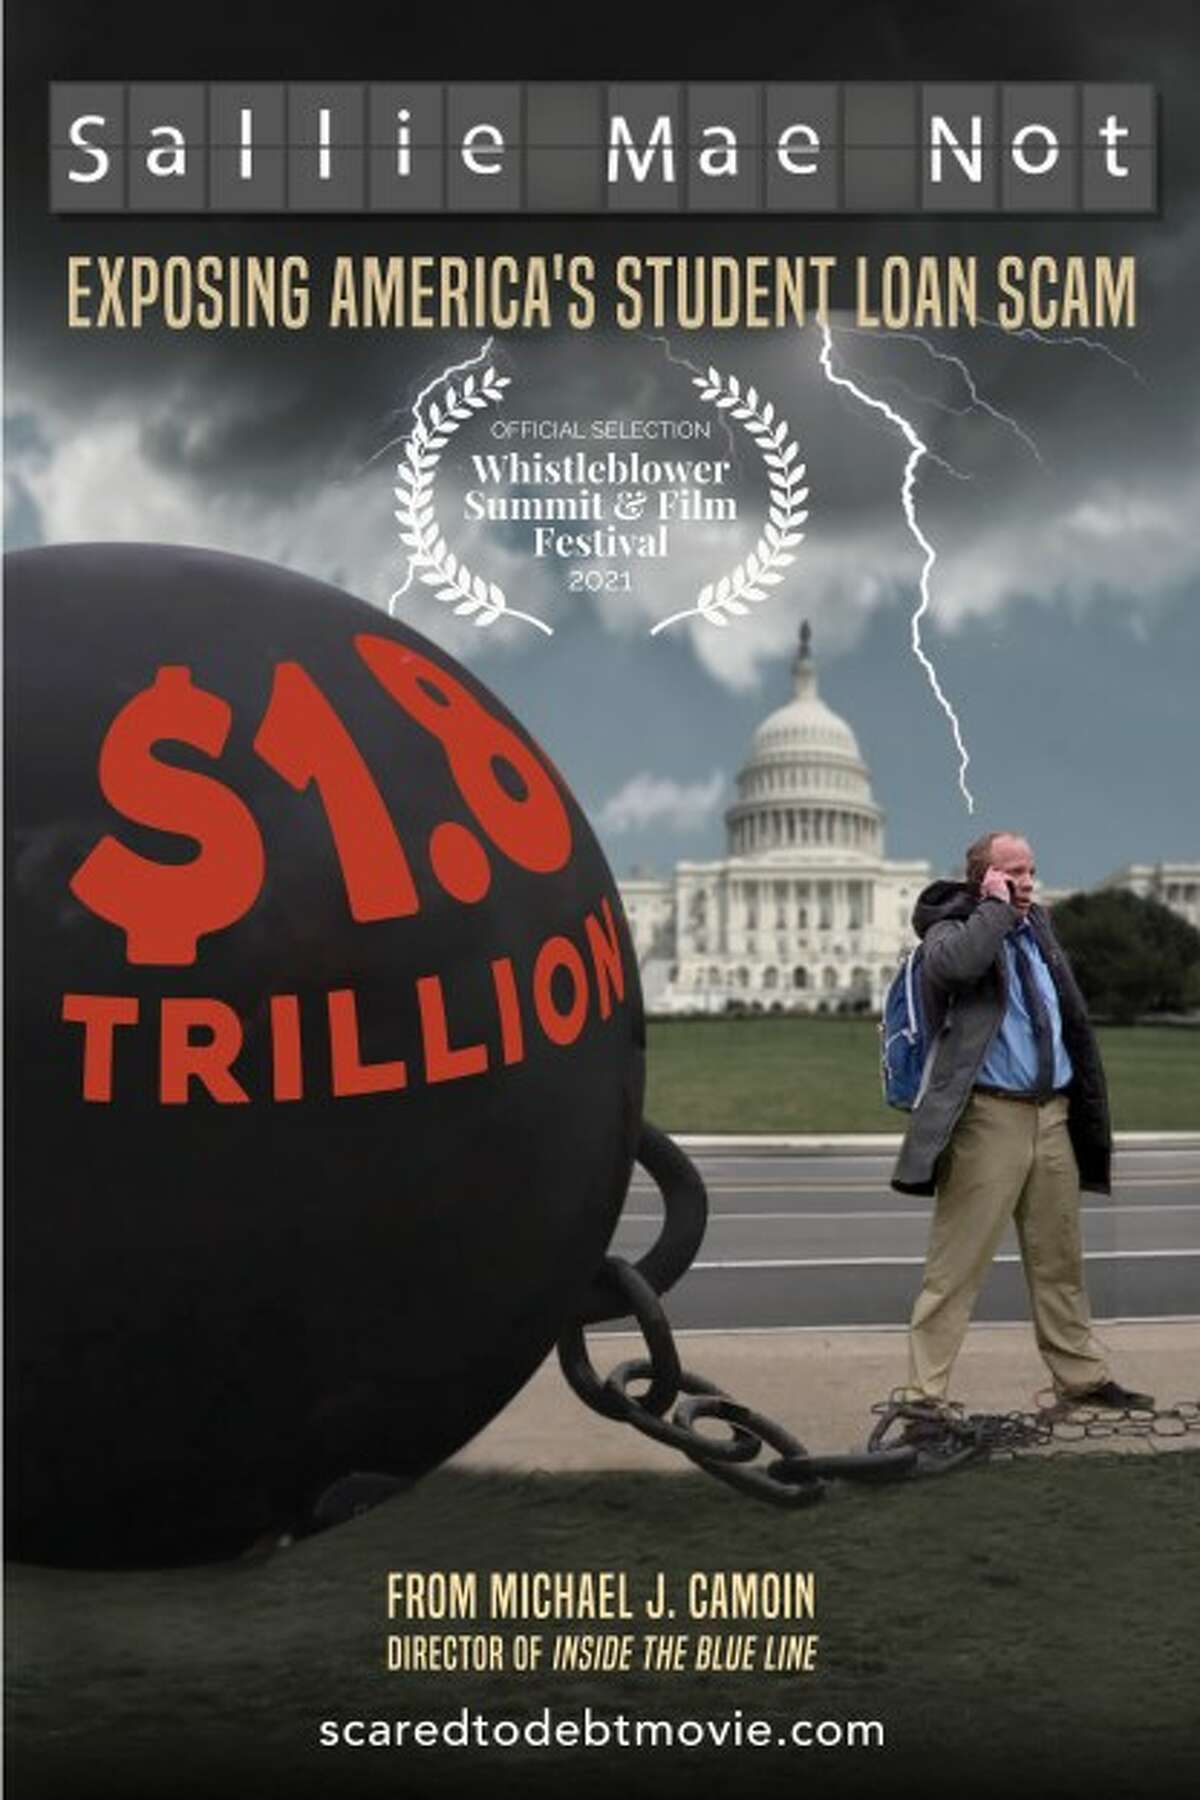 "Sallie Mae Not," by Albany filmmaker Mike Camoin, premieres virtually on July 26 at the Whistleblower Summit and Film Festival.